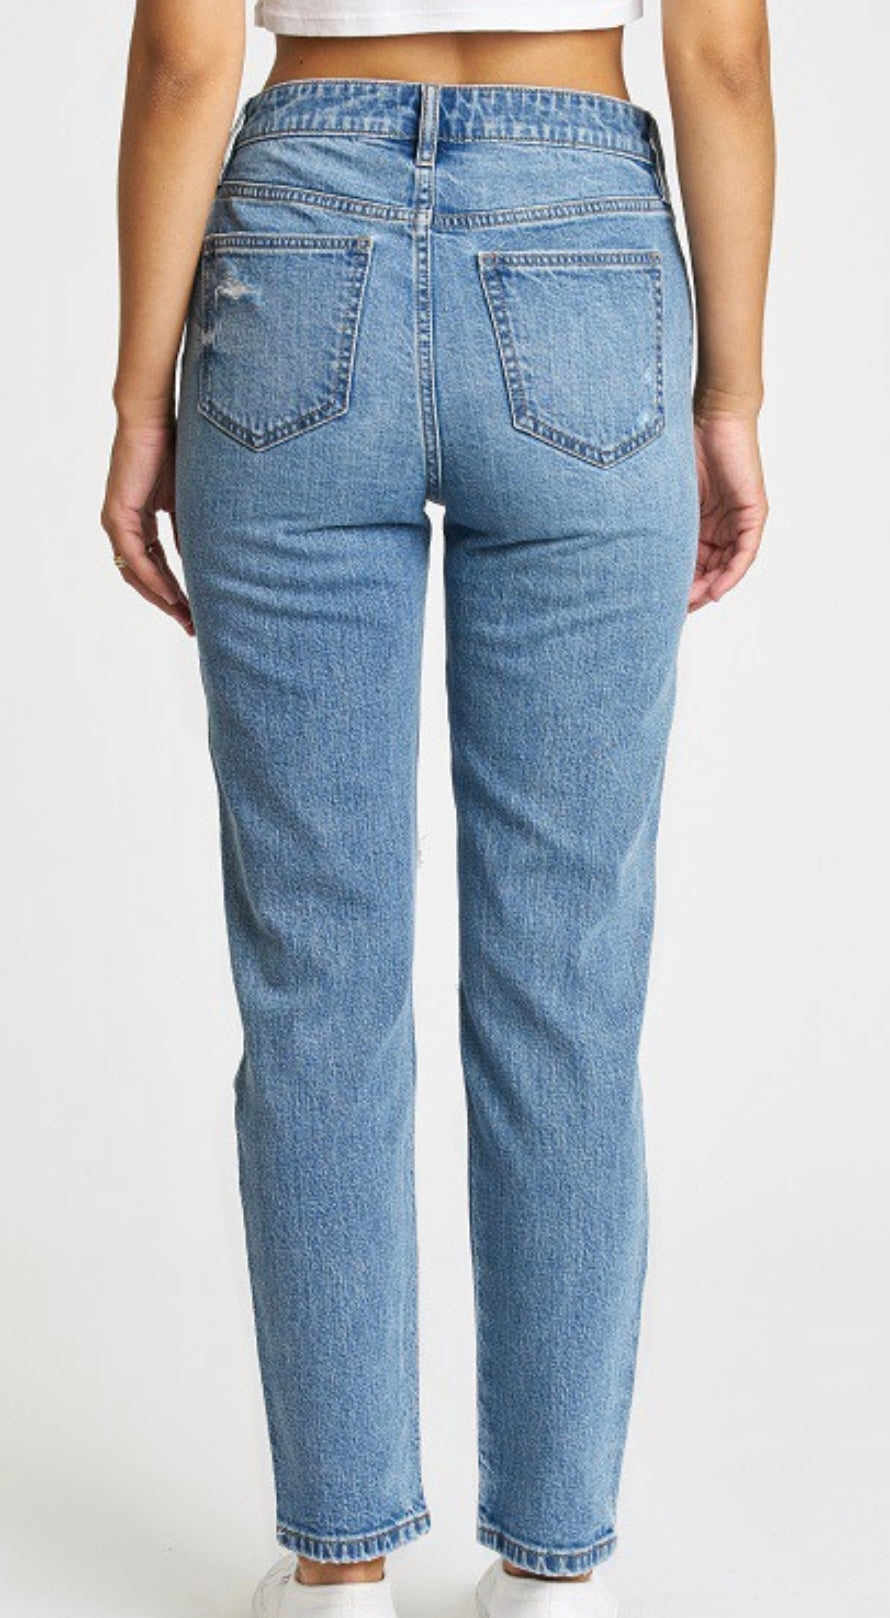 Hot Rod Mom Jeans